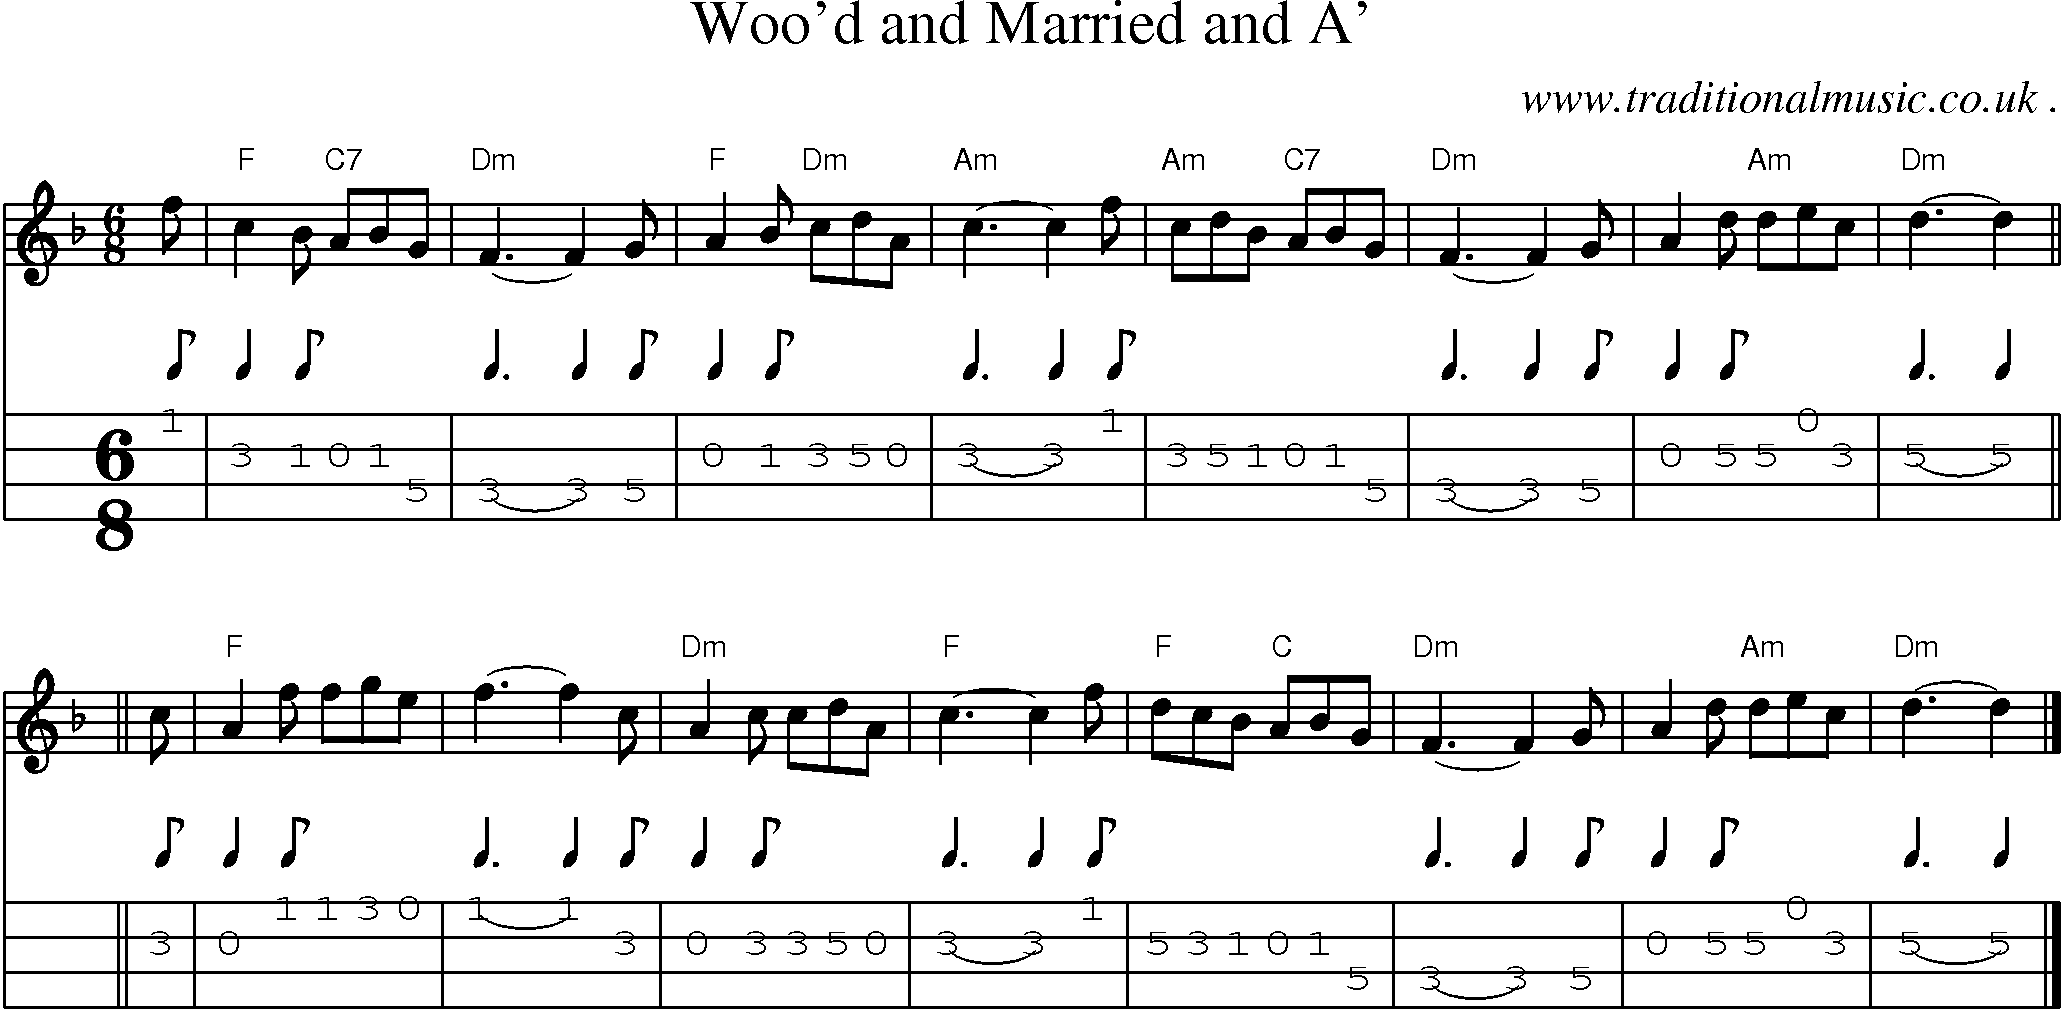 Sheet-music  score, Chords and Mandolin Tabs for Wood And Married And A